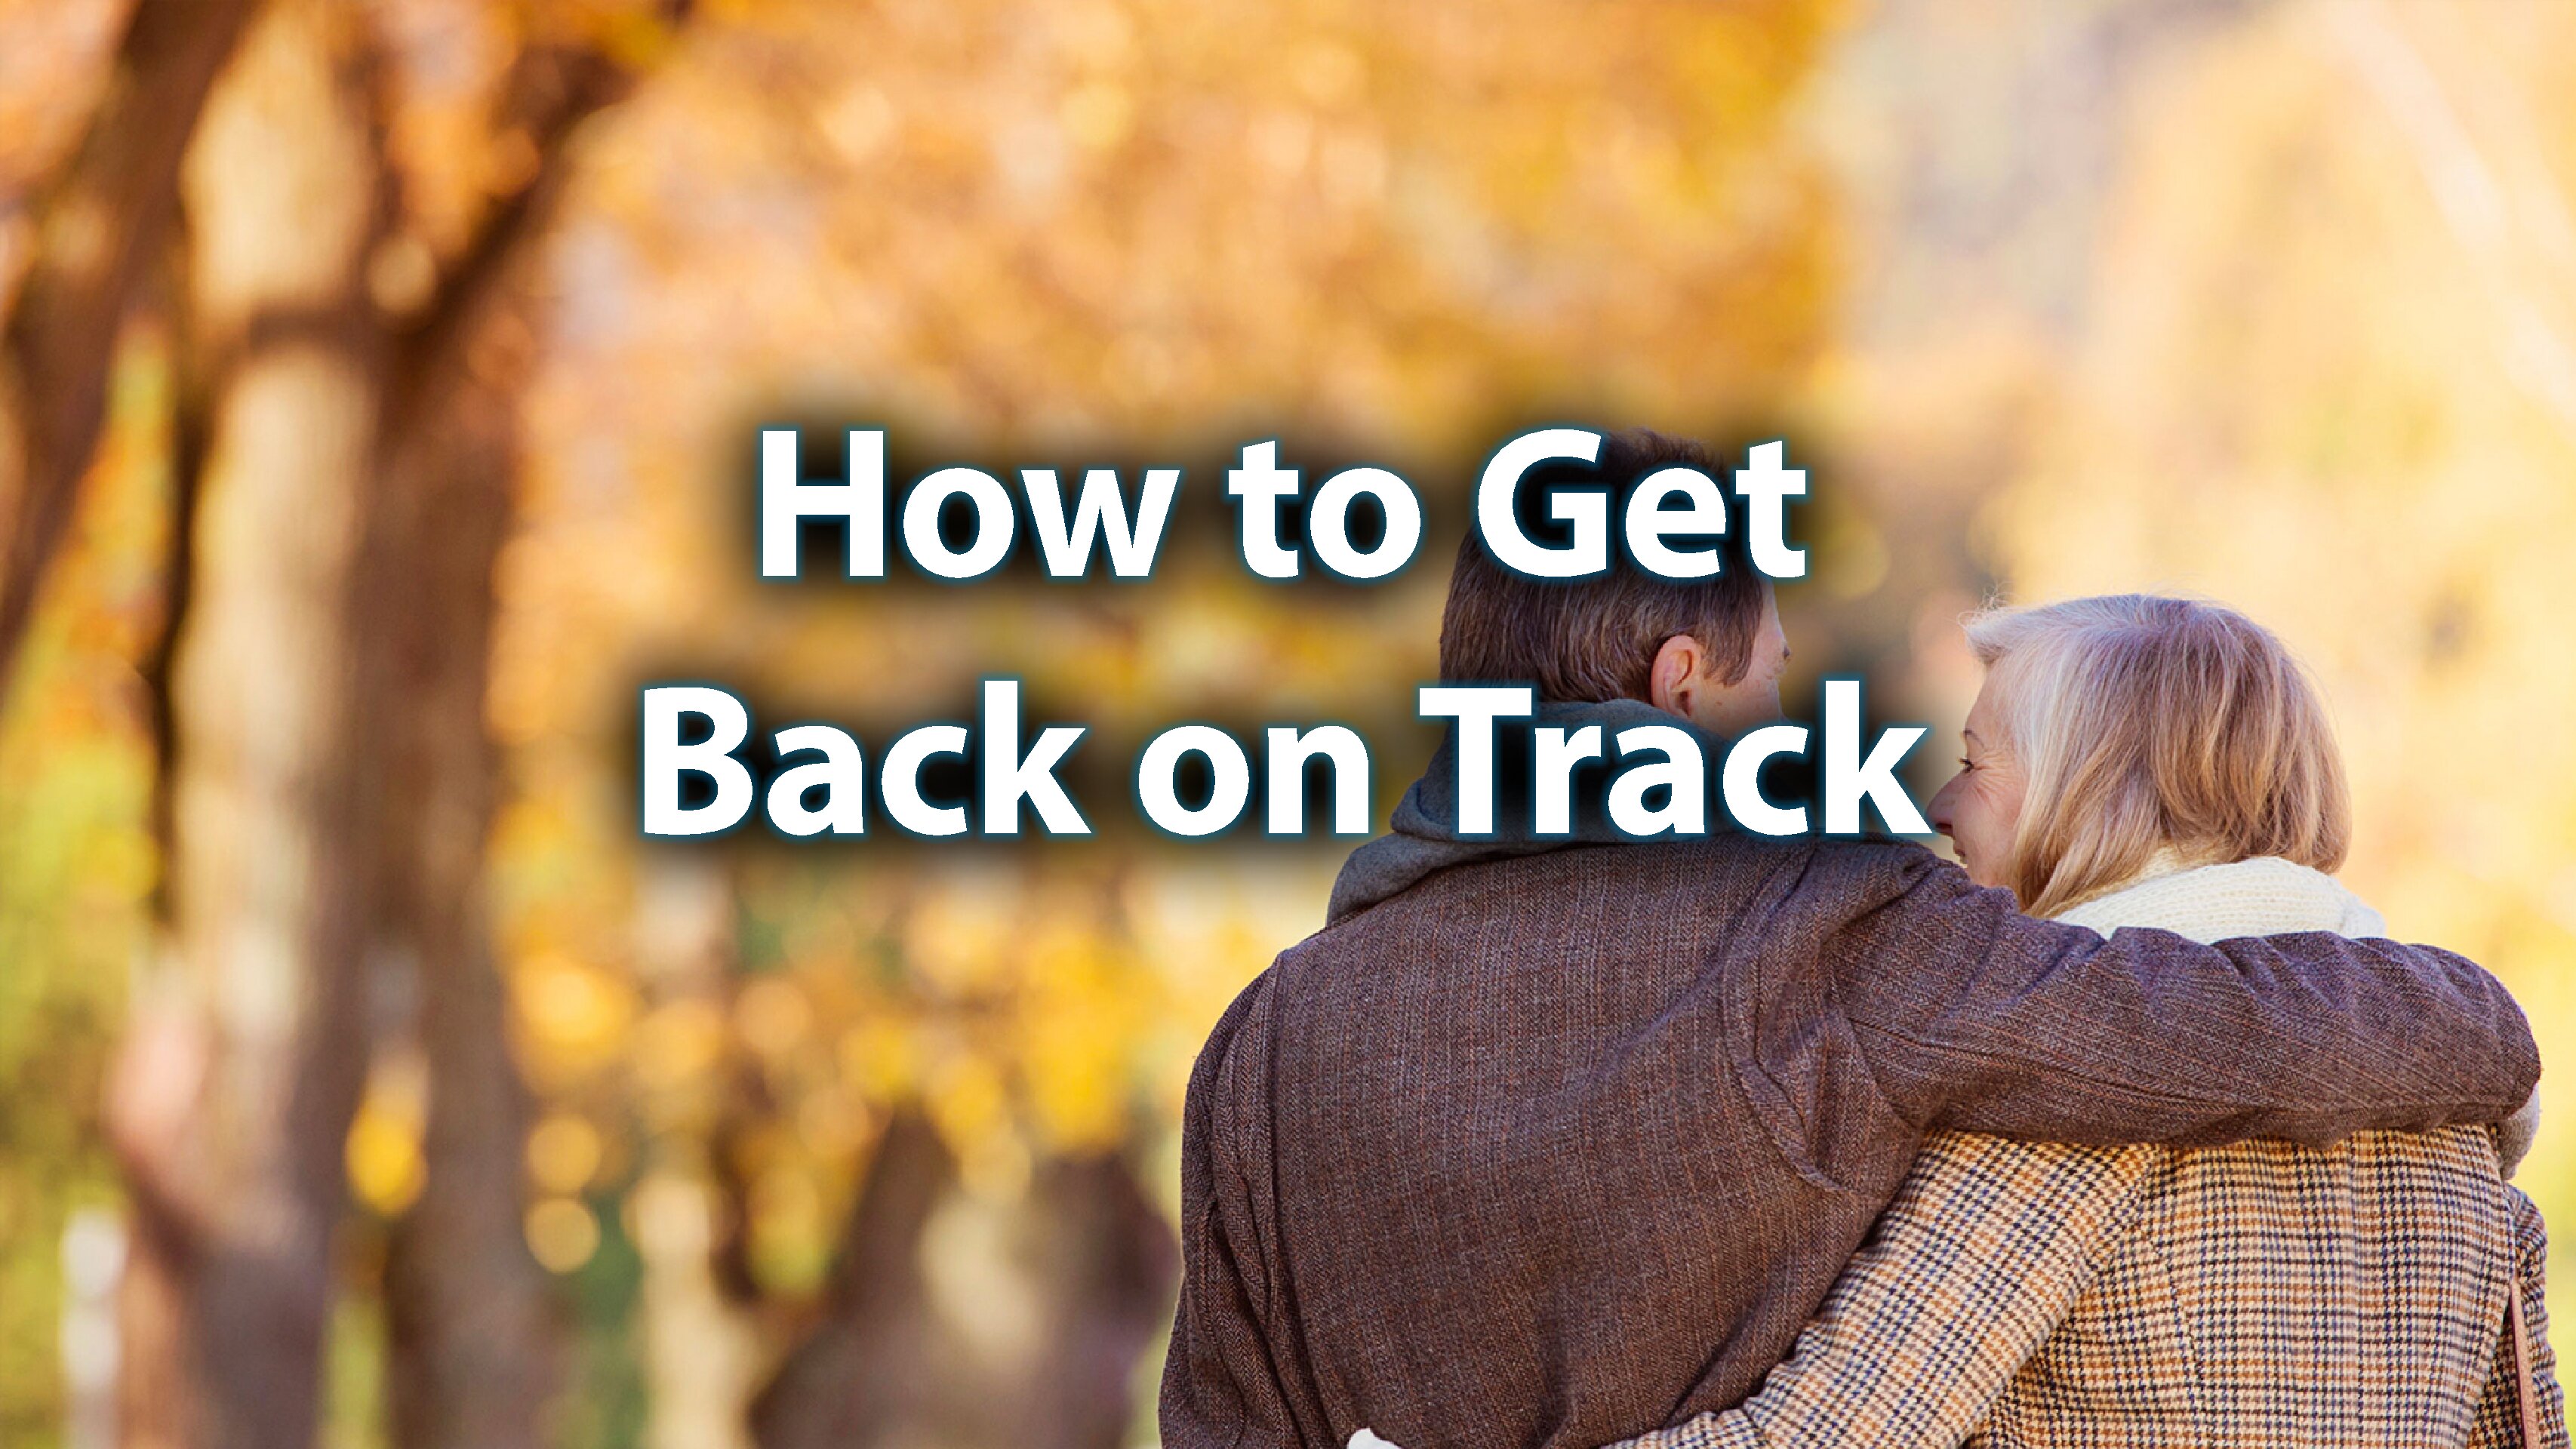 Day 27: How to Get Back on Track